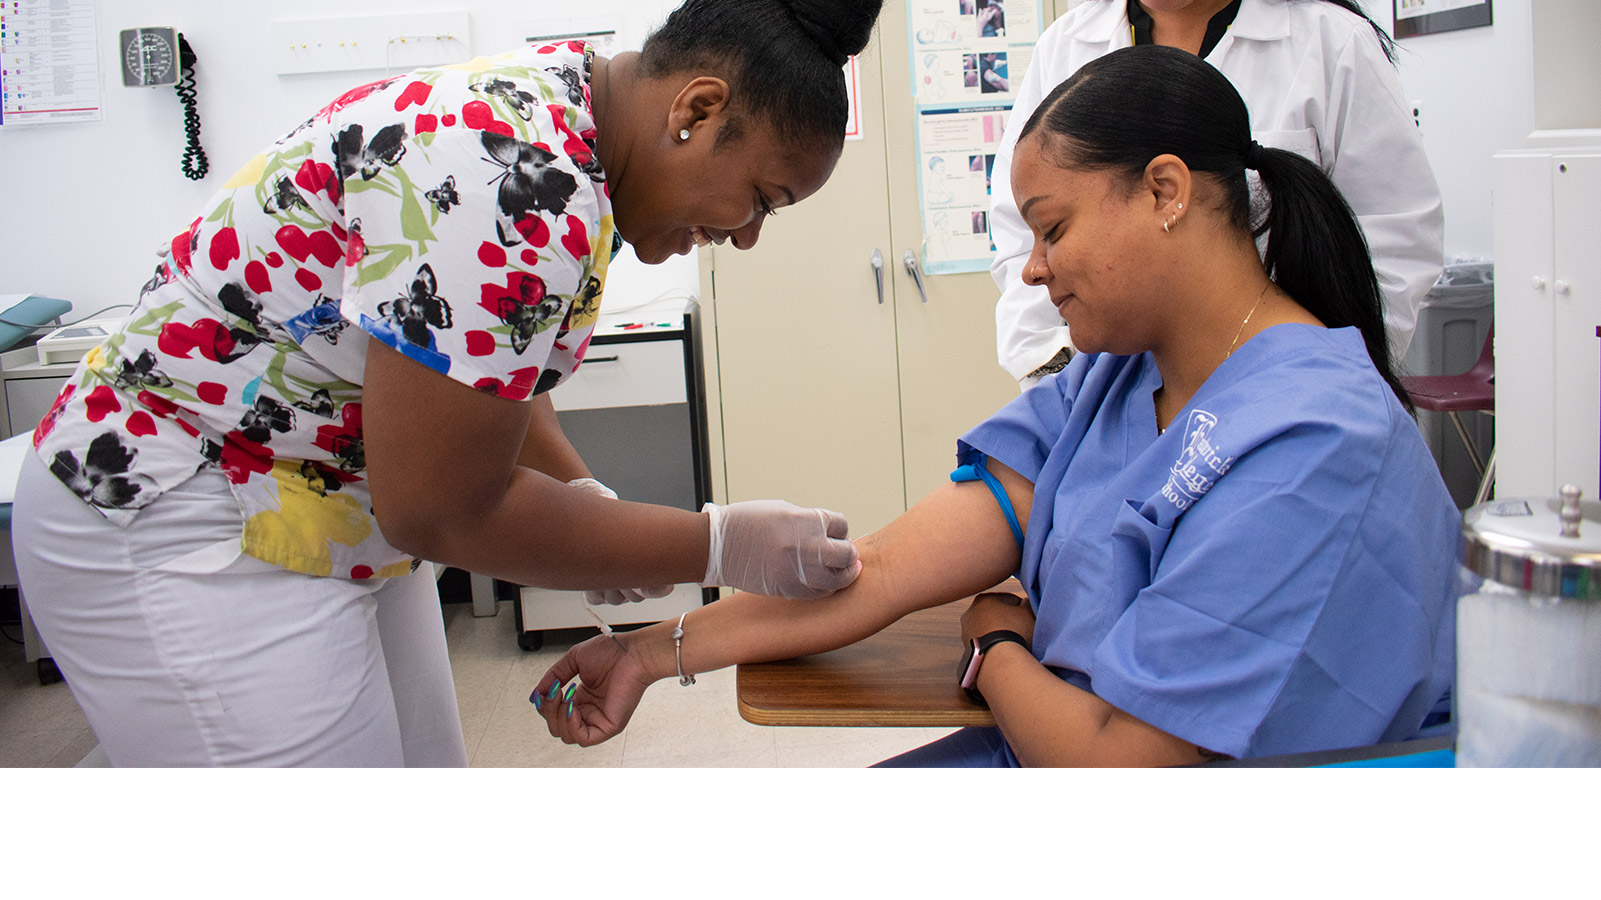 medical assisting student practices drawing blood on fellow student